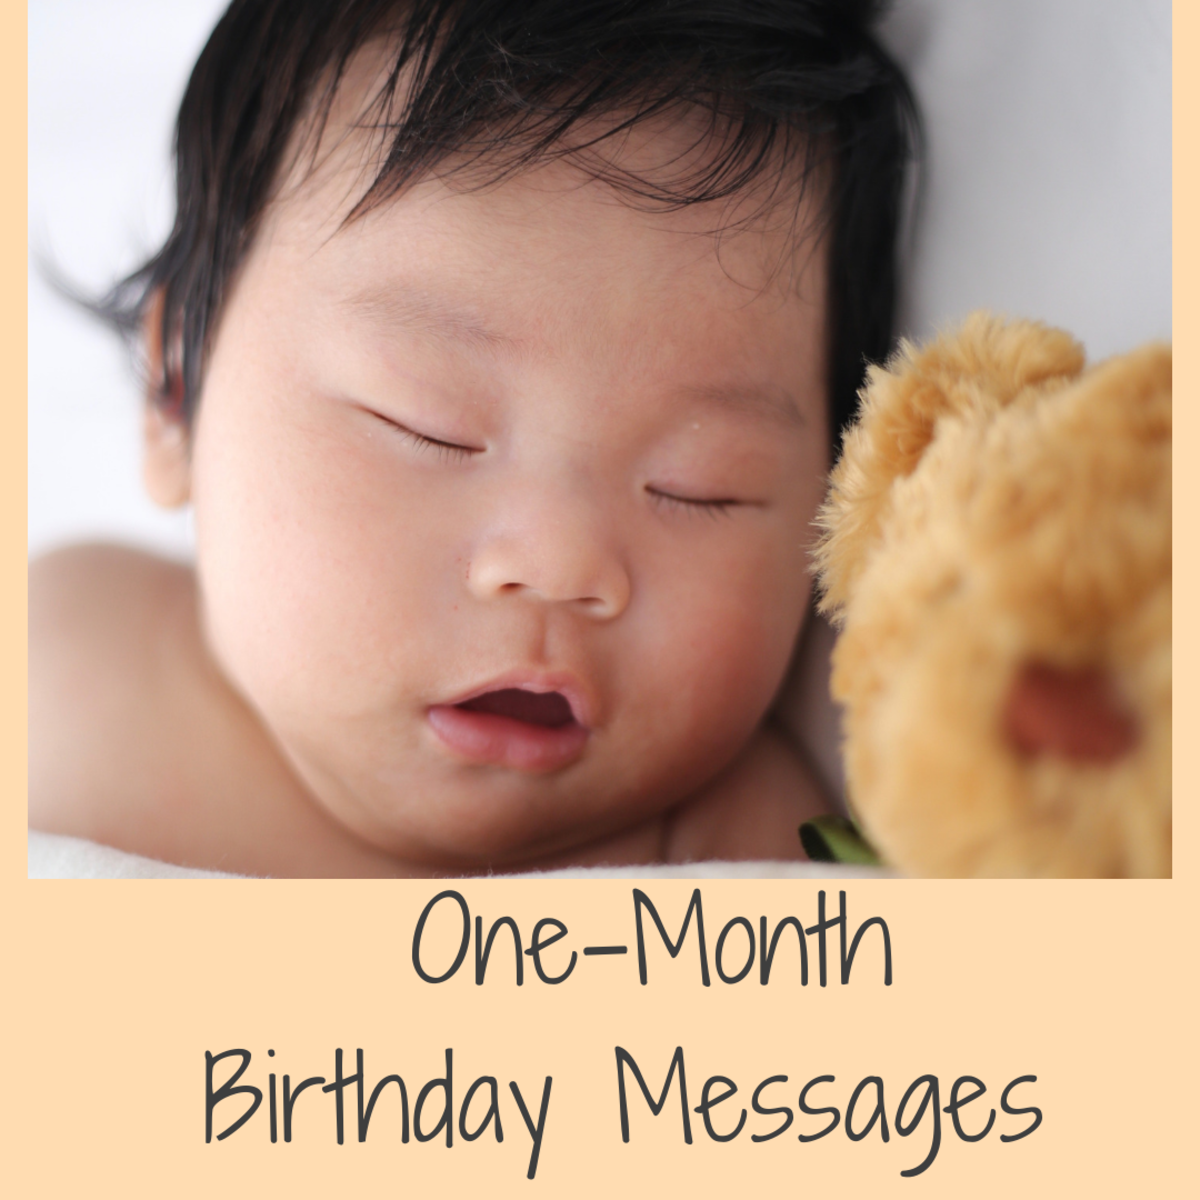 happy-full-moon-baby-wishes-what-to-write-in-one-month-birthday-card